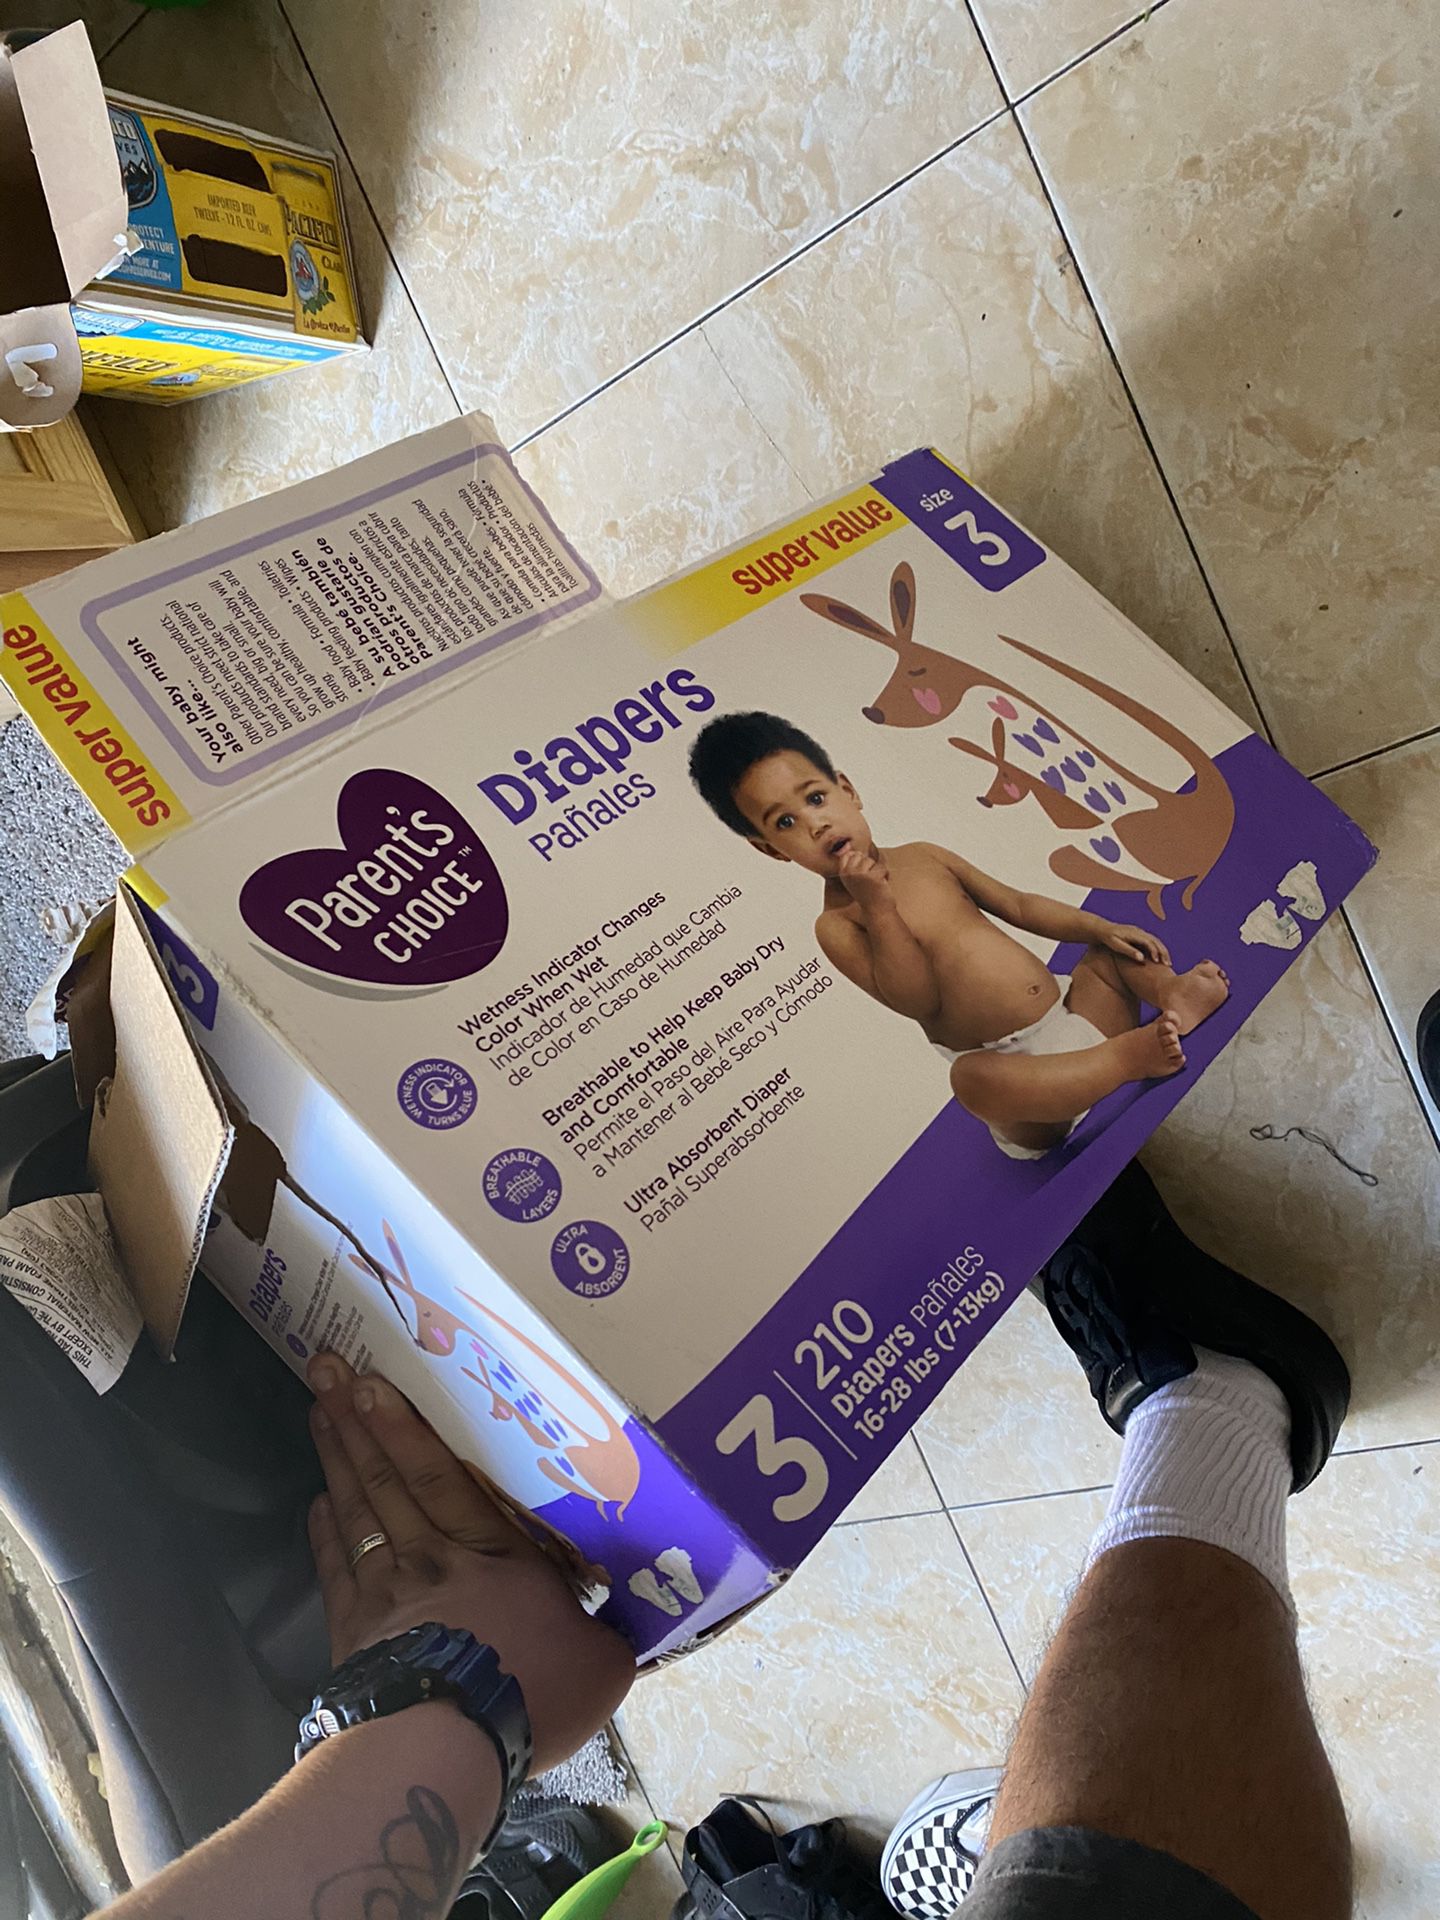 Opened box Size 3 diapers (unopened bundles) bought them but my kid outgrew them (FREE)